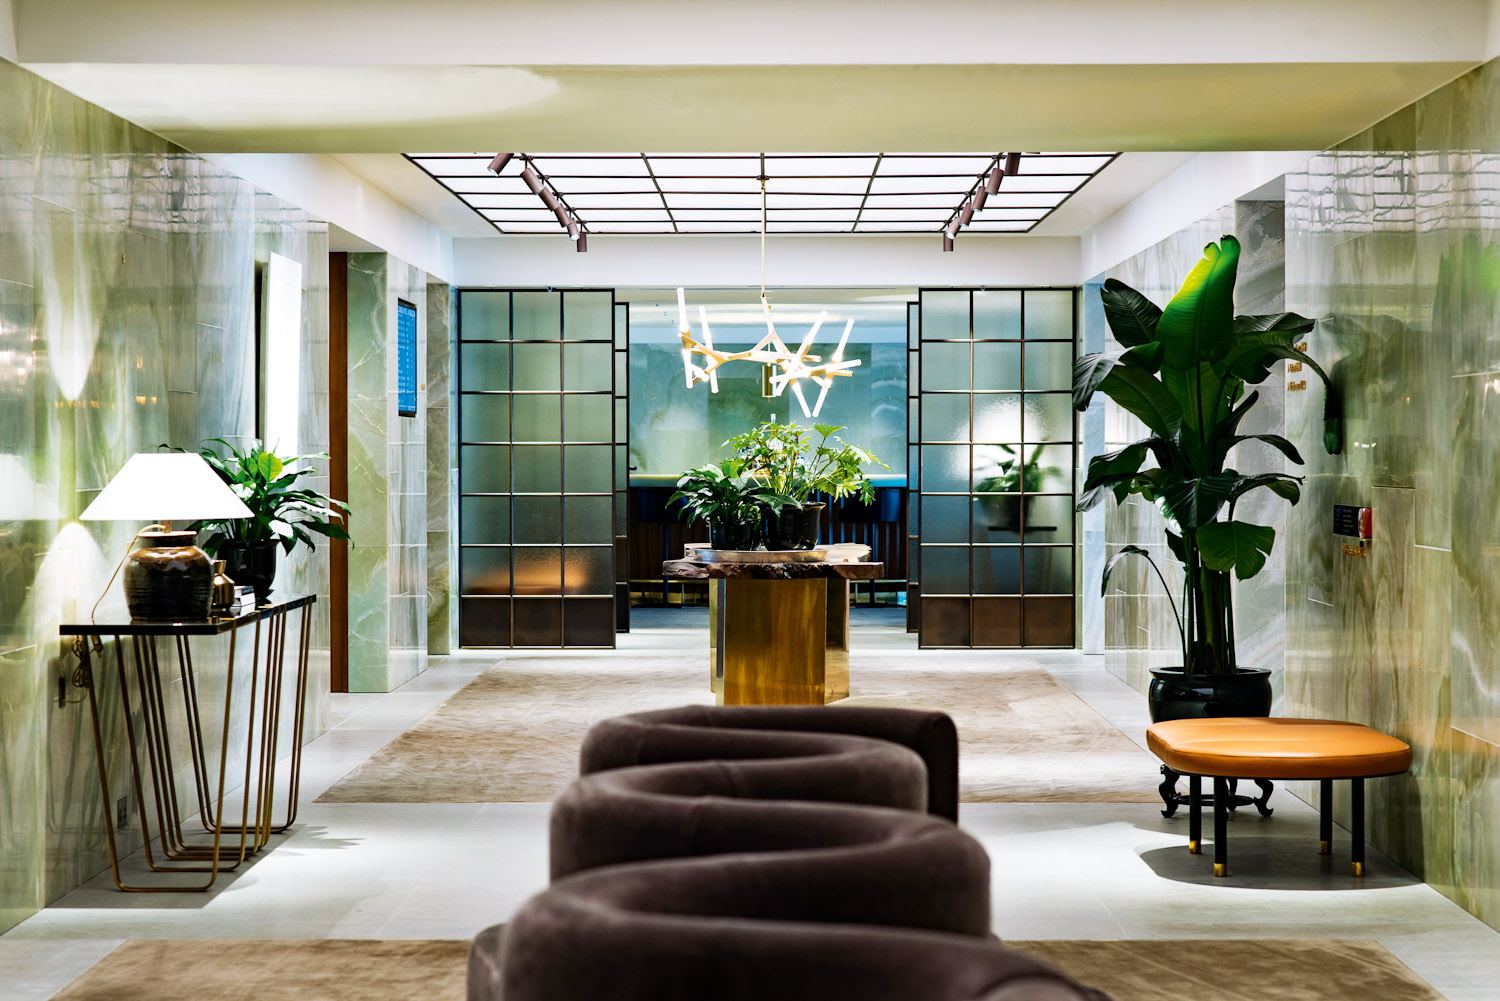 The Pier - Cathay Pacific's flagship First Class lounge.